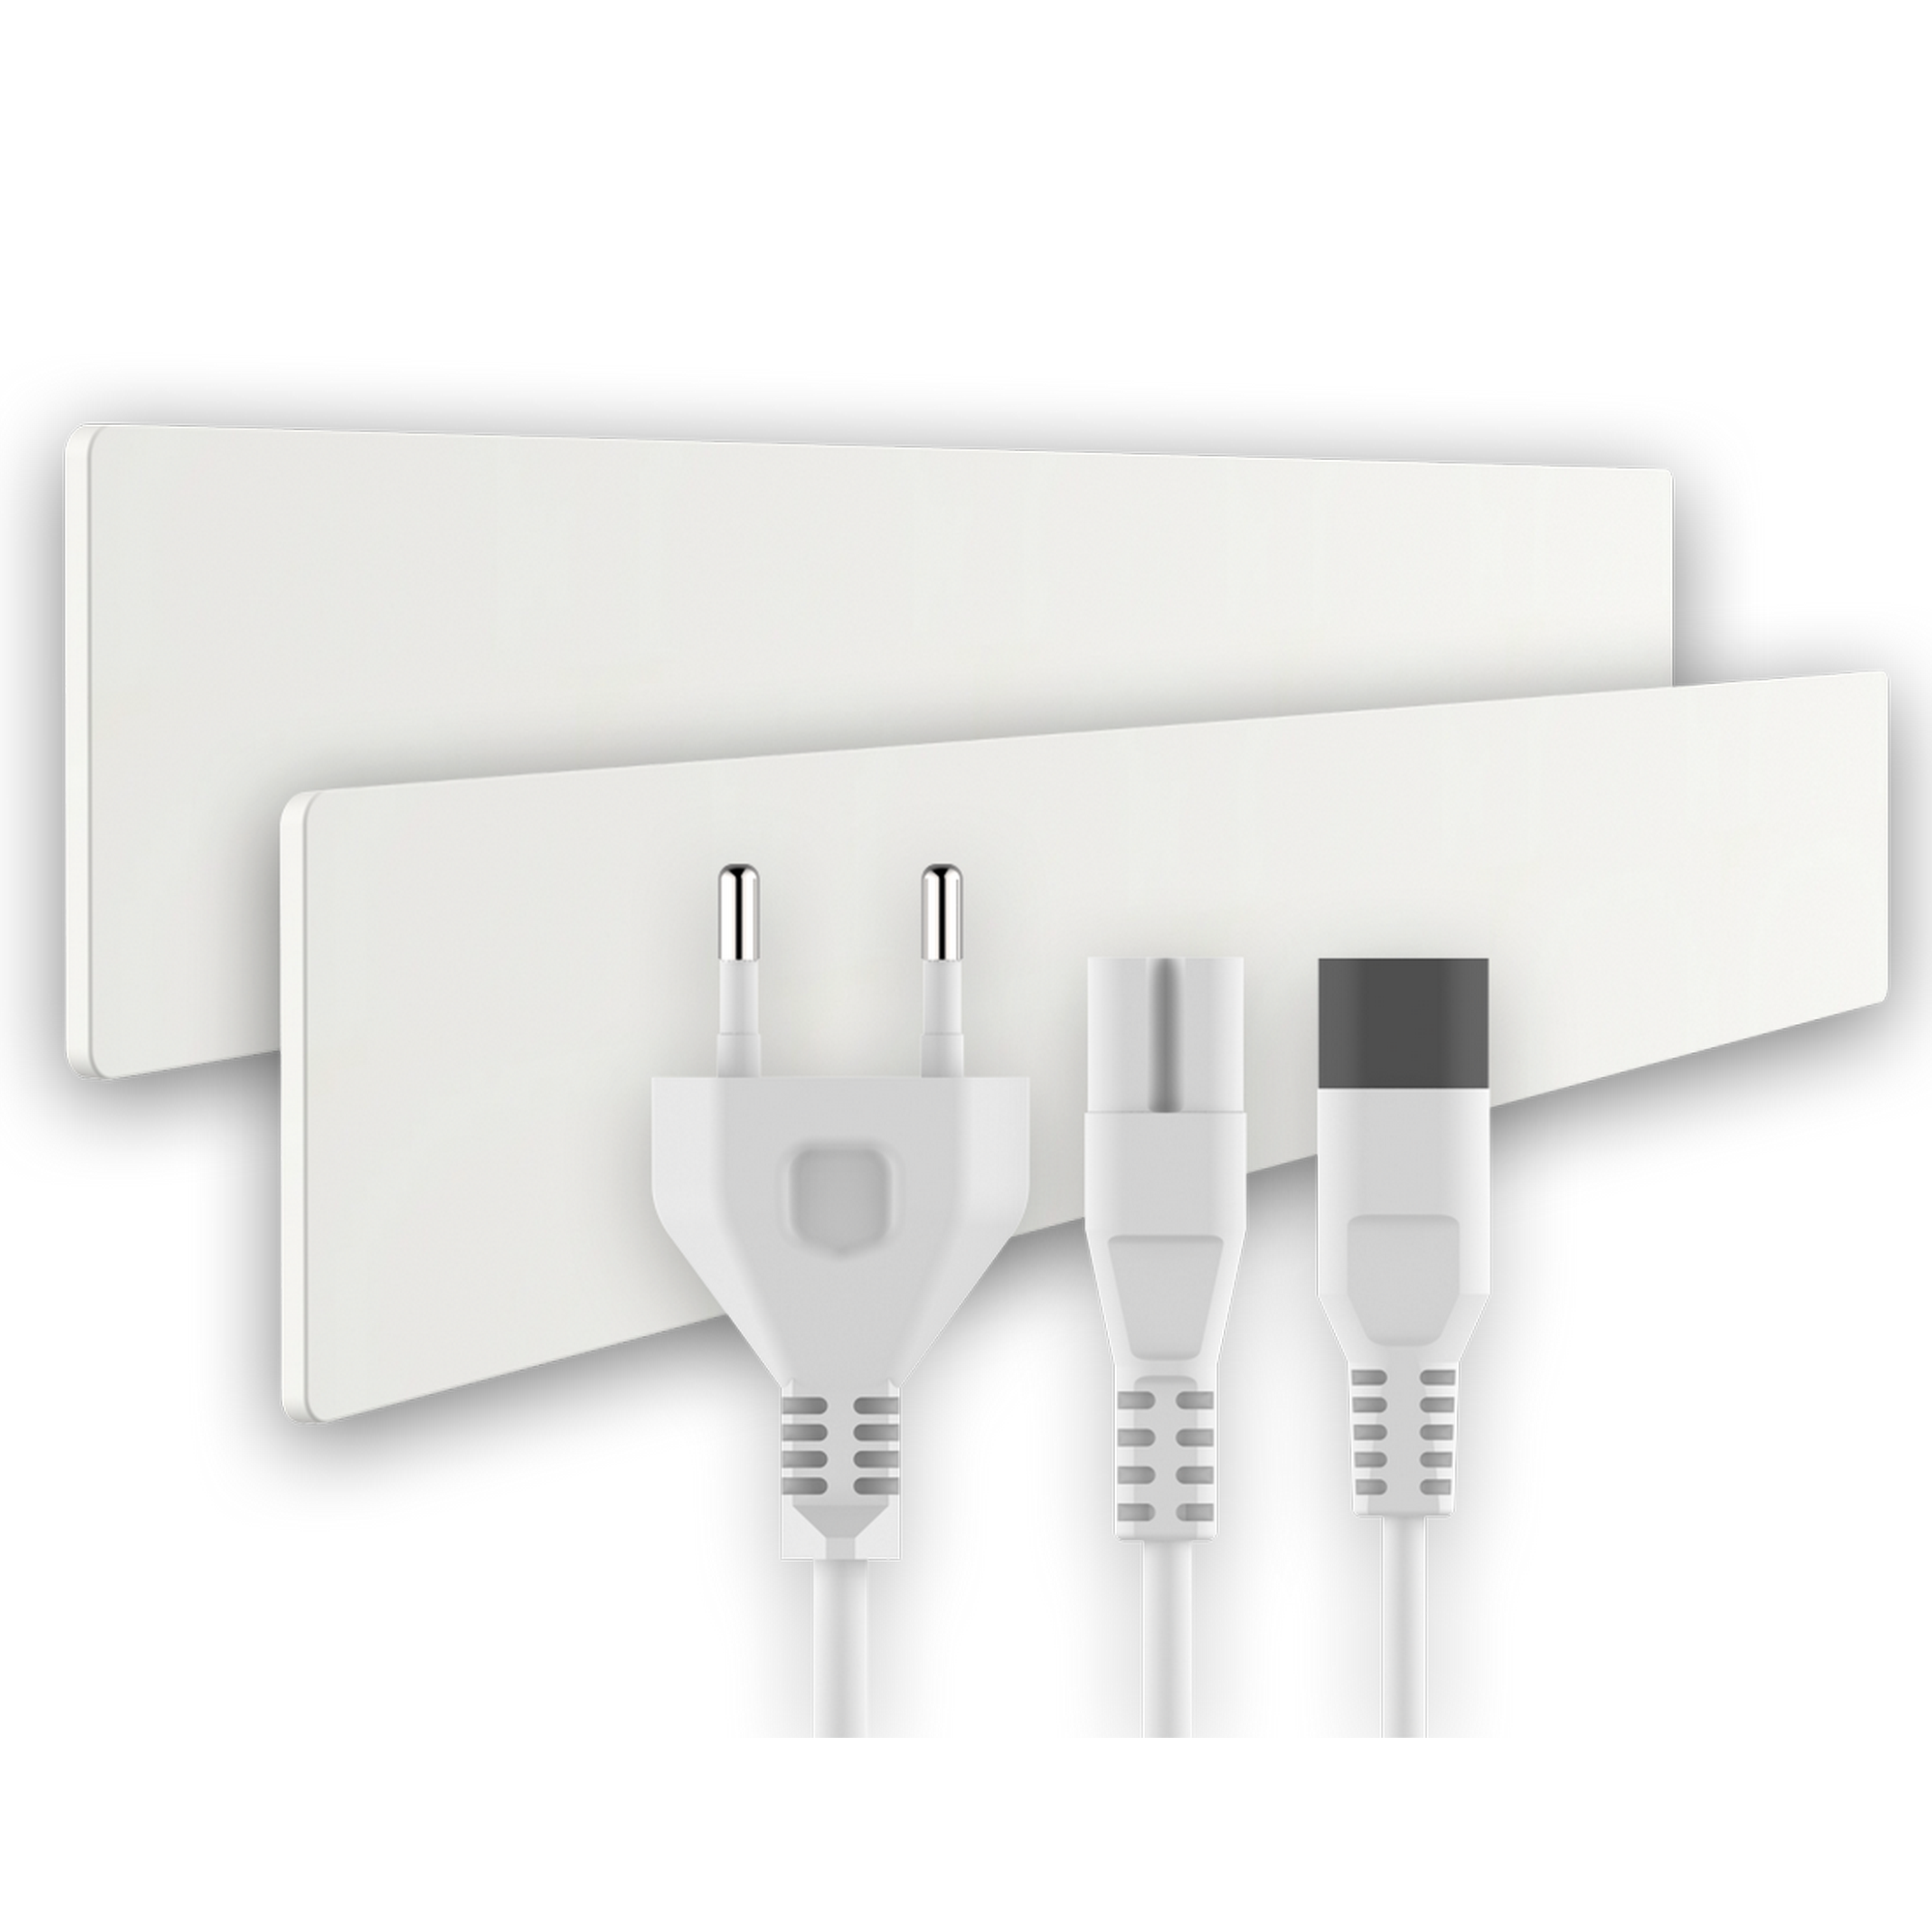 Schimmel Dry 'EDH-WHI-SDRY-SET' weiß 55 W + product picture